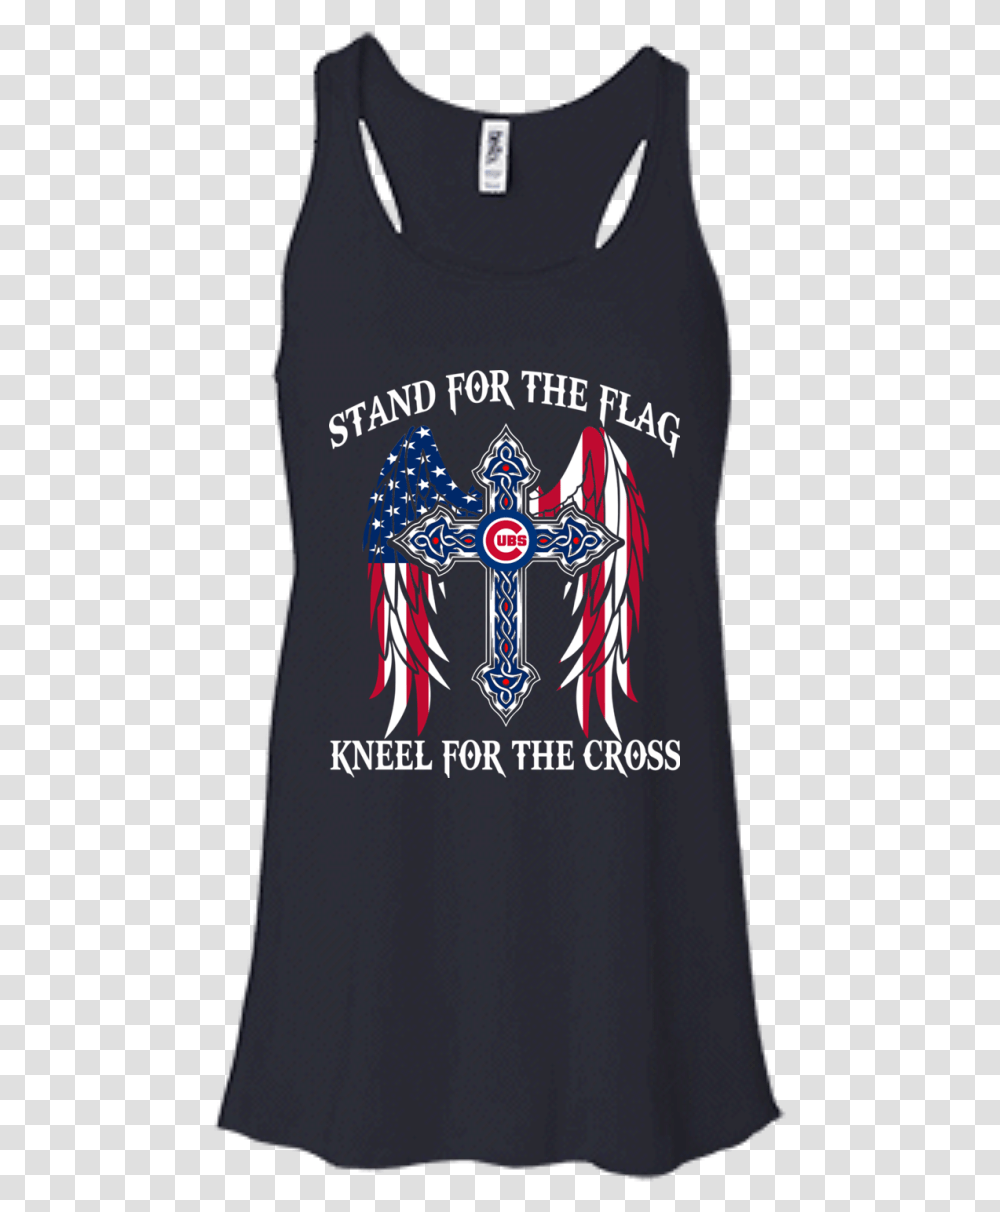 Chicago Cubs Stand For The Flag Kneel For The Cross Tokio Rio Nairobi Denver Helsinki, Sleeve, Shirt, Tank Top Transparent Png